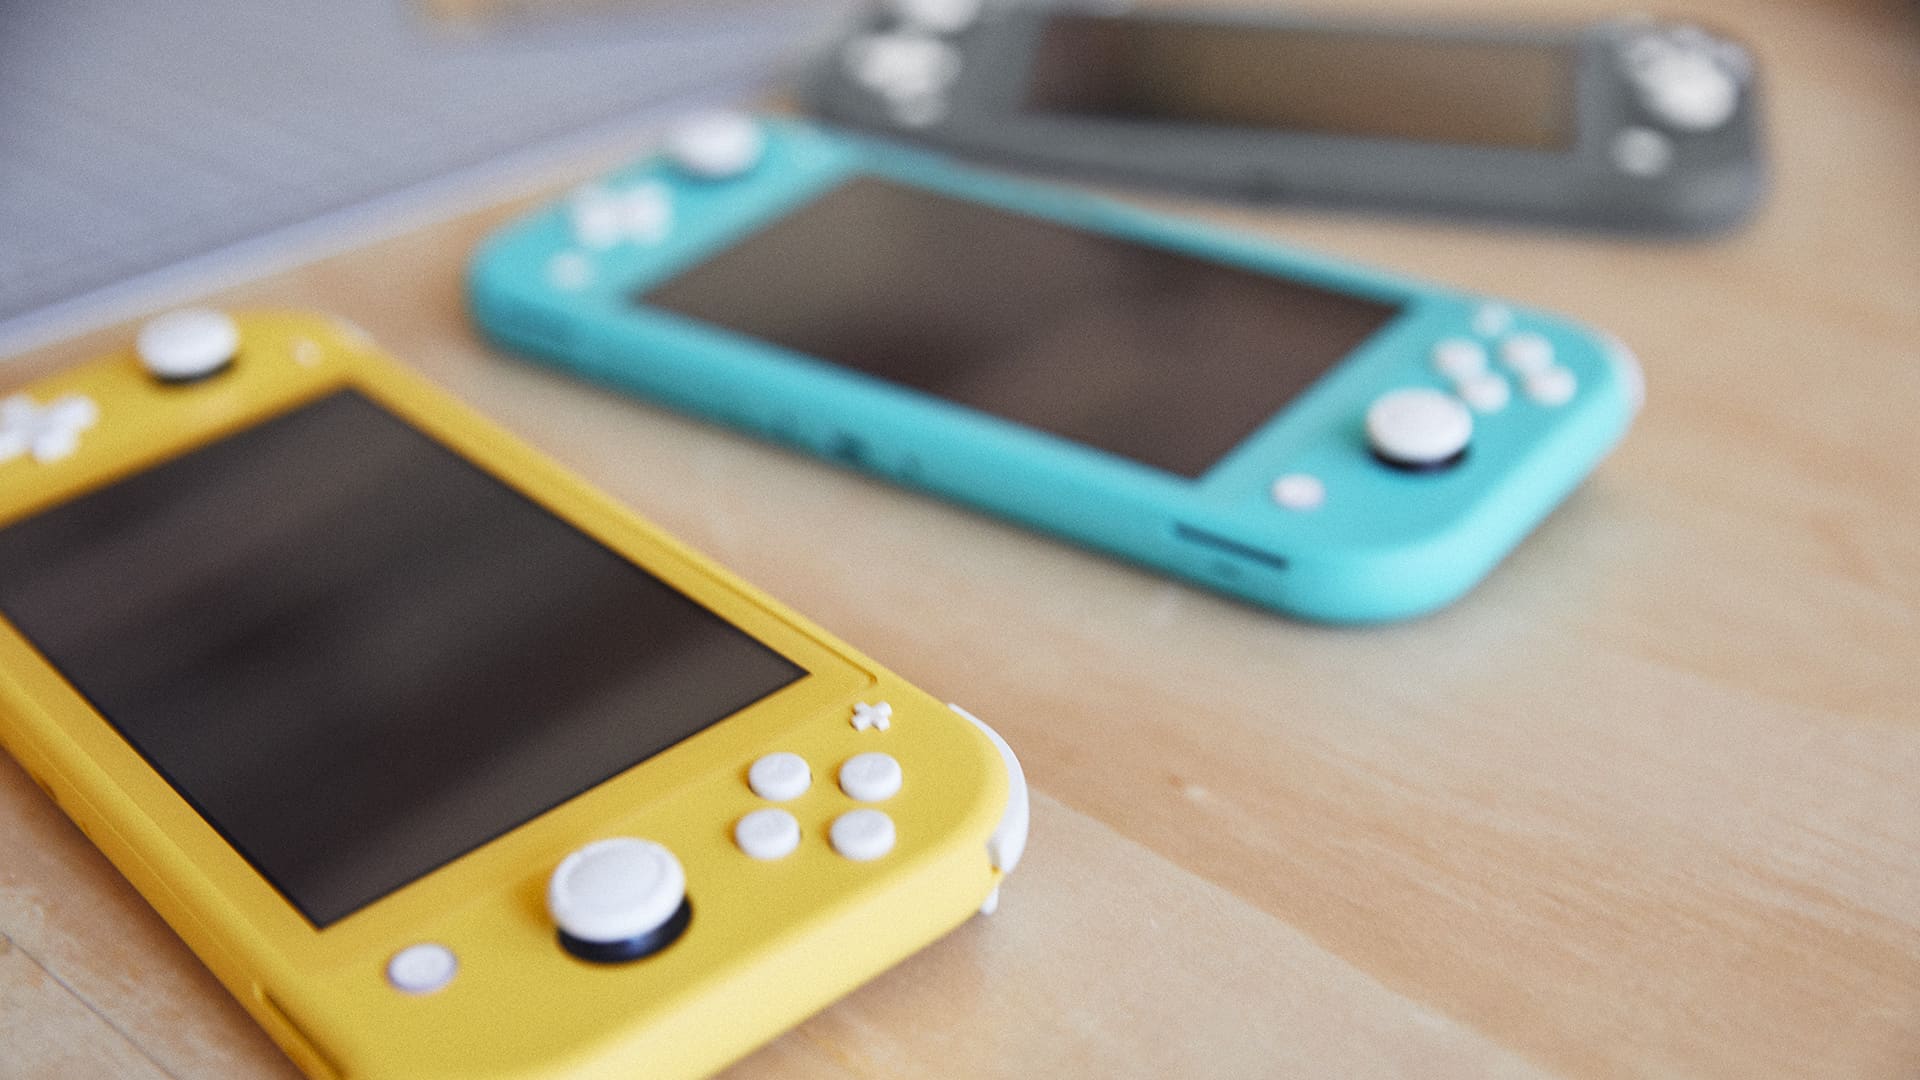 do you need an sd card for switch lite